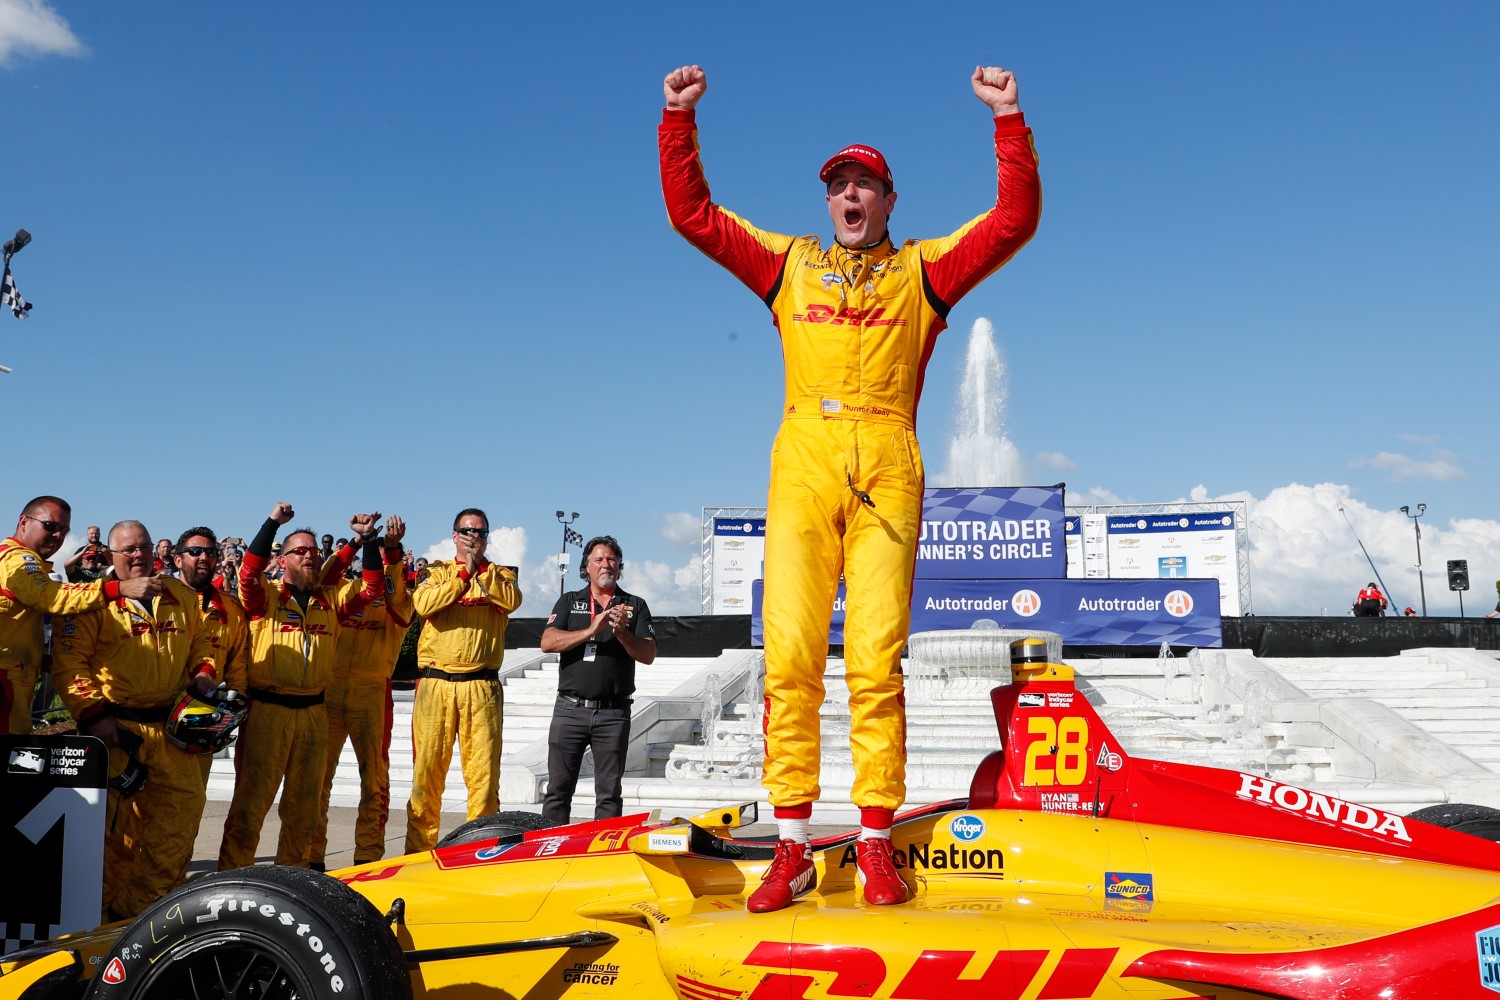 Another top American, Ryan Hunter-Reay